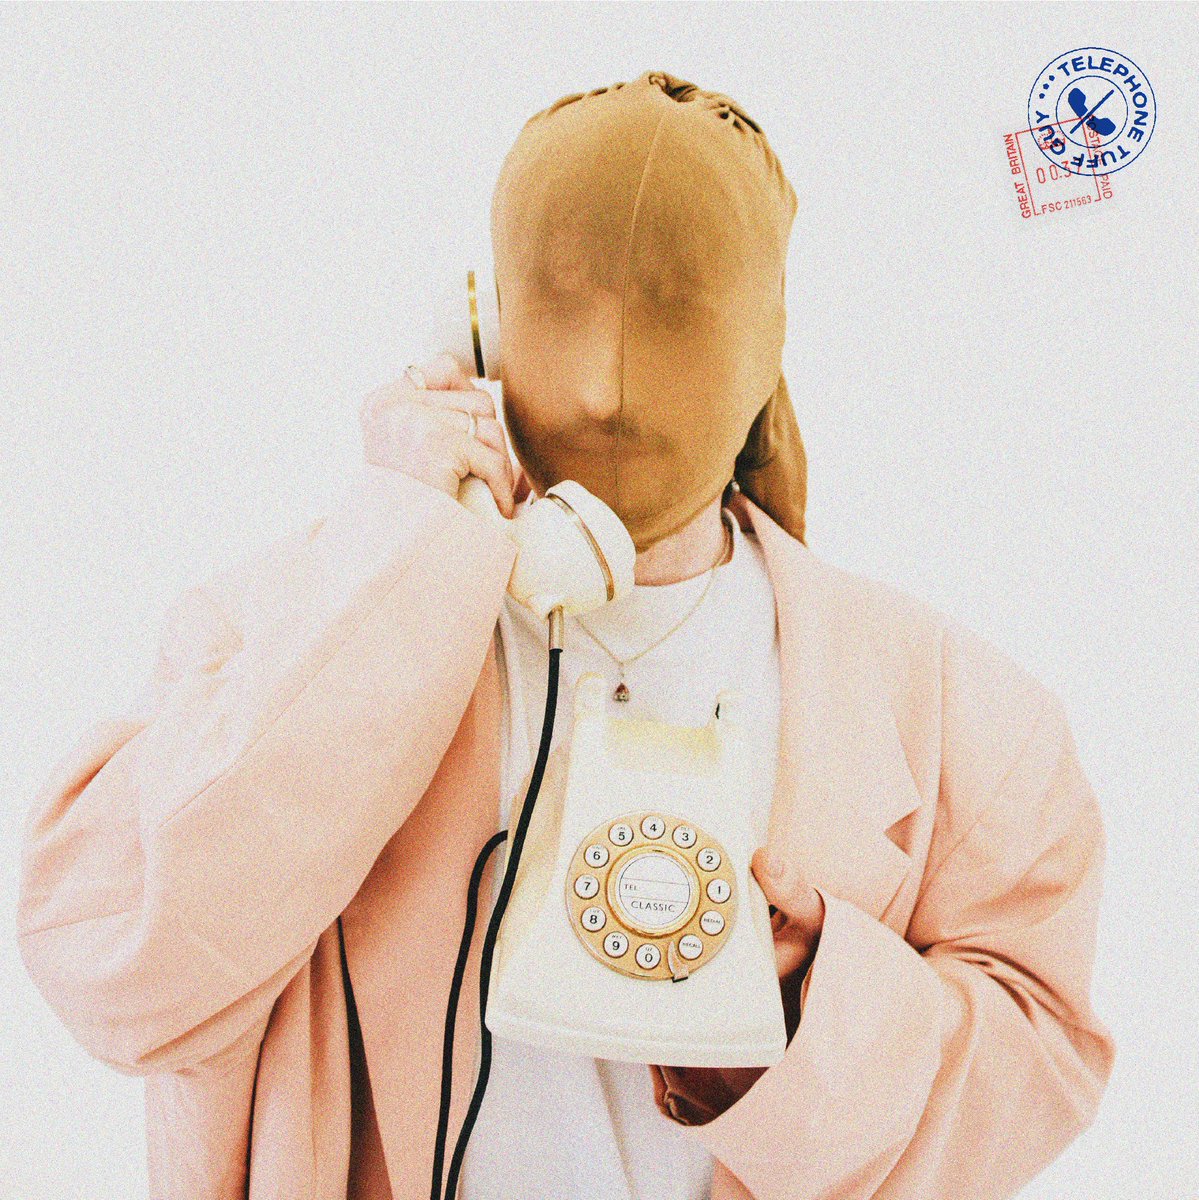 ☎️TELEPHONE TUFF GUY OUT NOW☎️ Available to stream now on all platforms 🏝️ Happy Wednesday x Produced by: Gareth Nuttall Mastered by: Grant Berry Cover art: @lens_of_a_wool + @benashurstdesign on insta